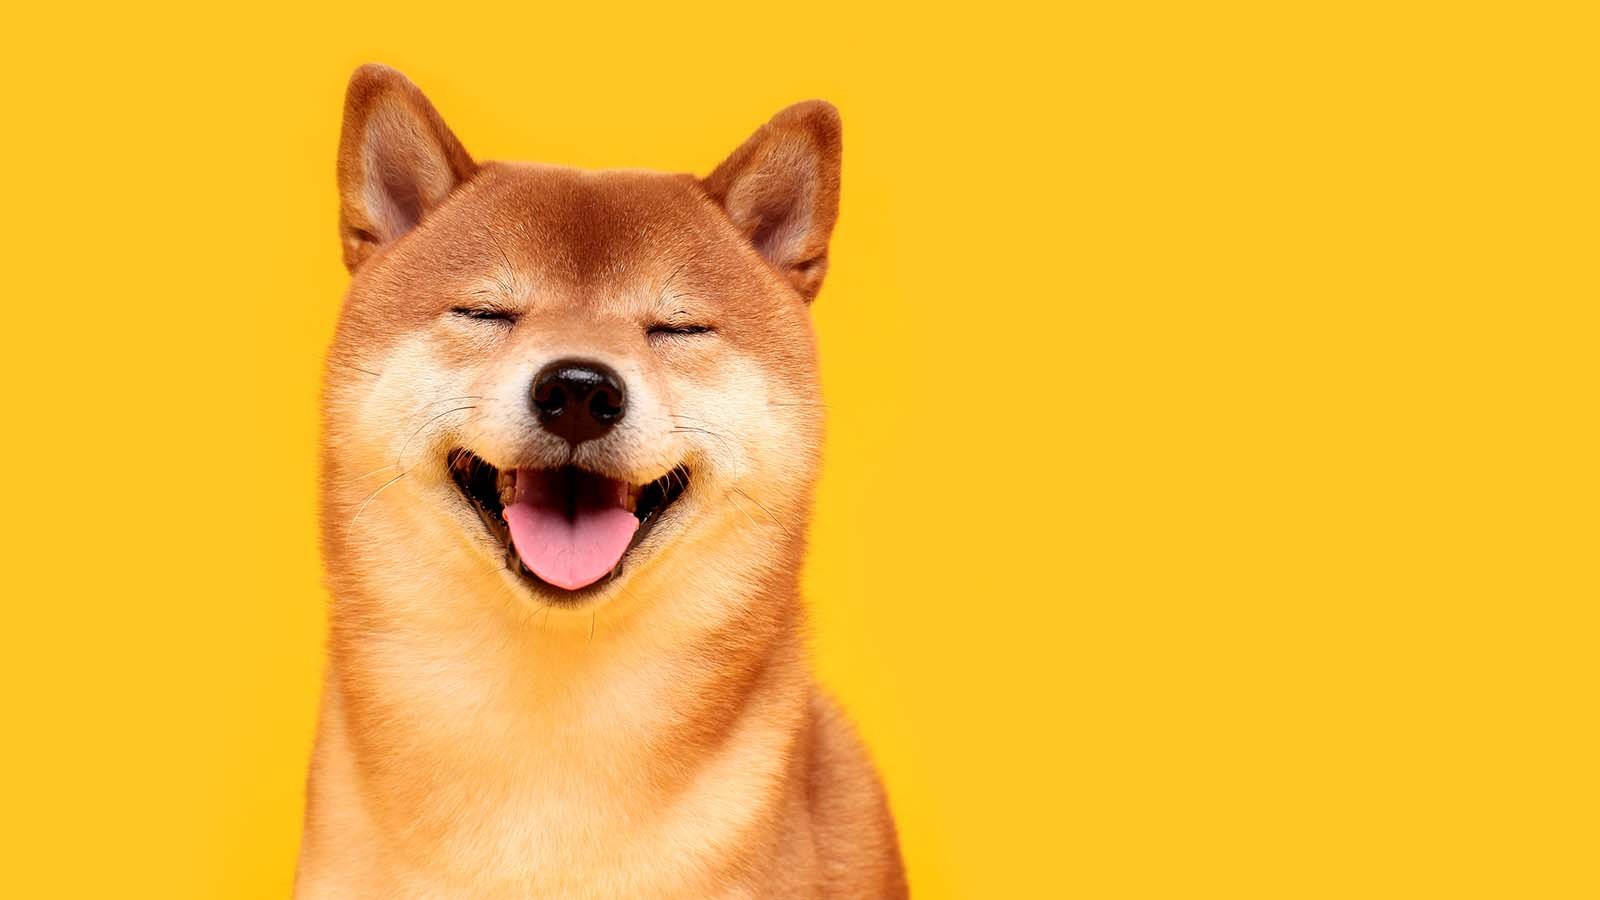 A smiling Shiba Inu dog in front of a bright yellow background representing ShibaDoge Prices.